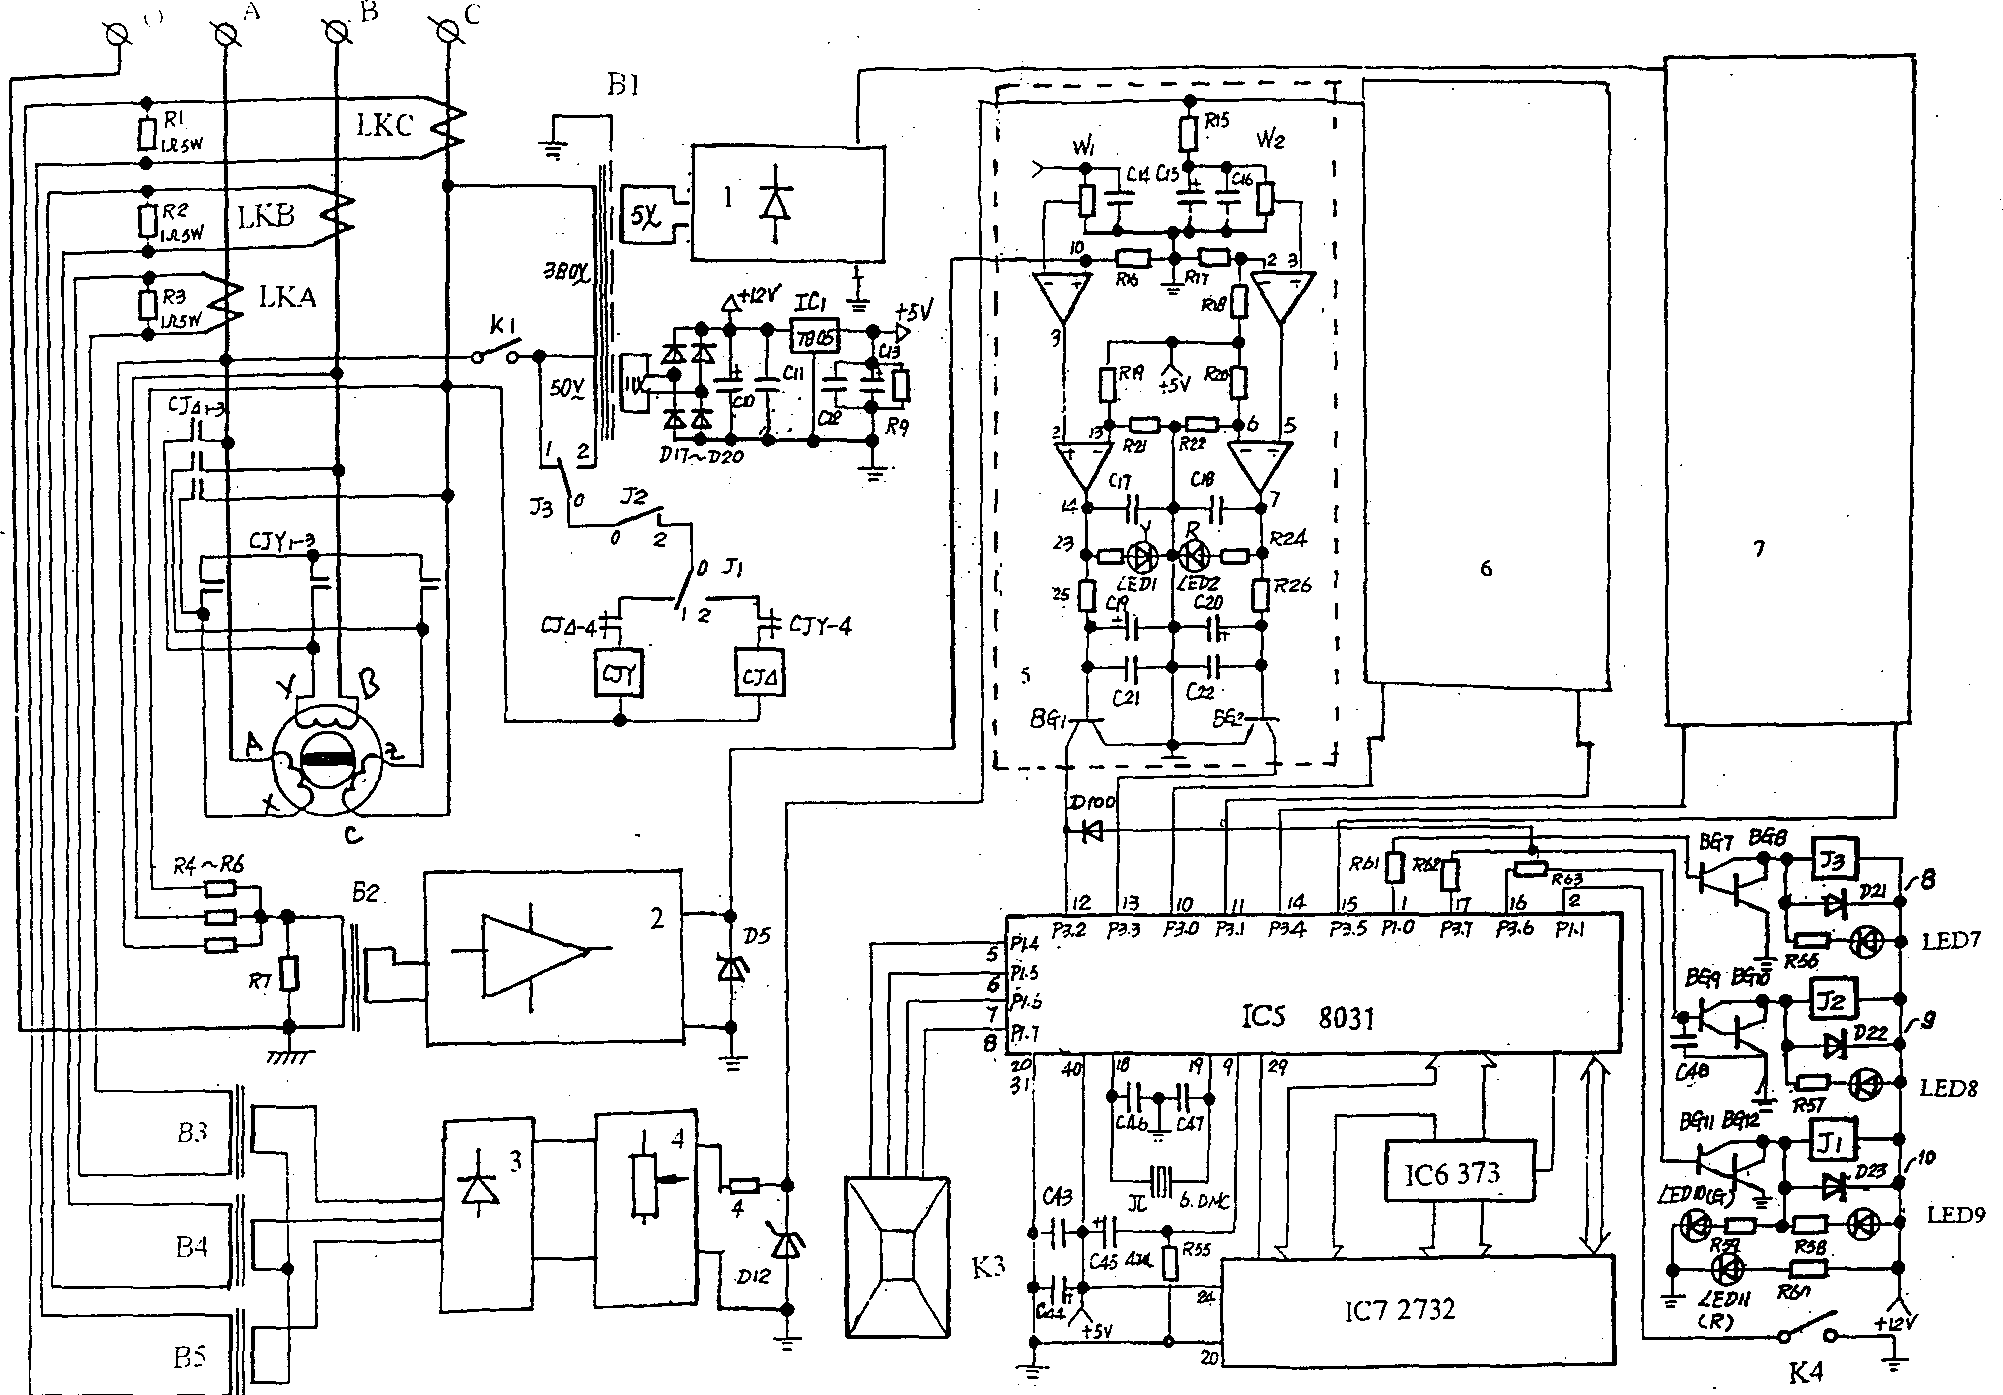 Control system for three-phase motor